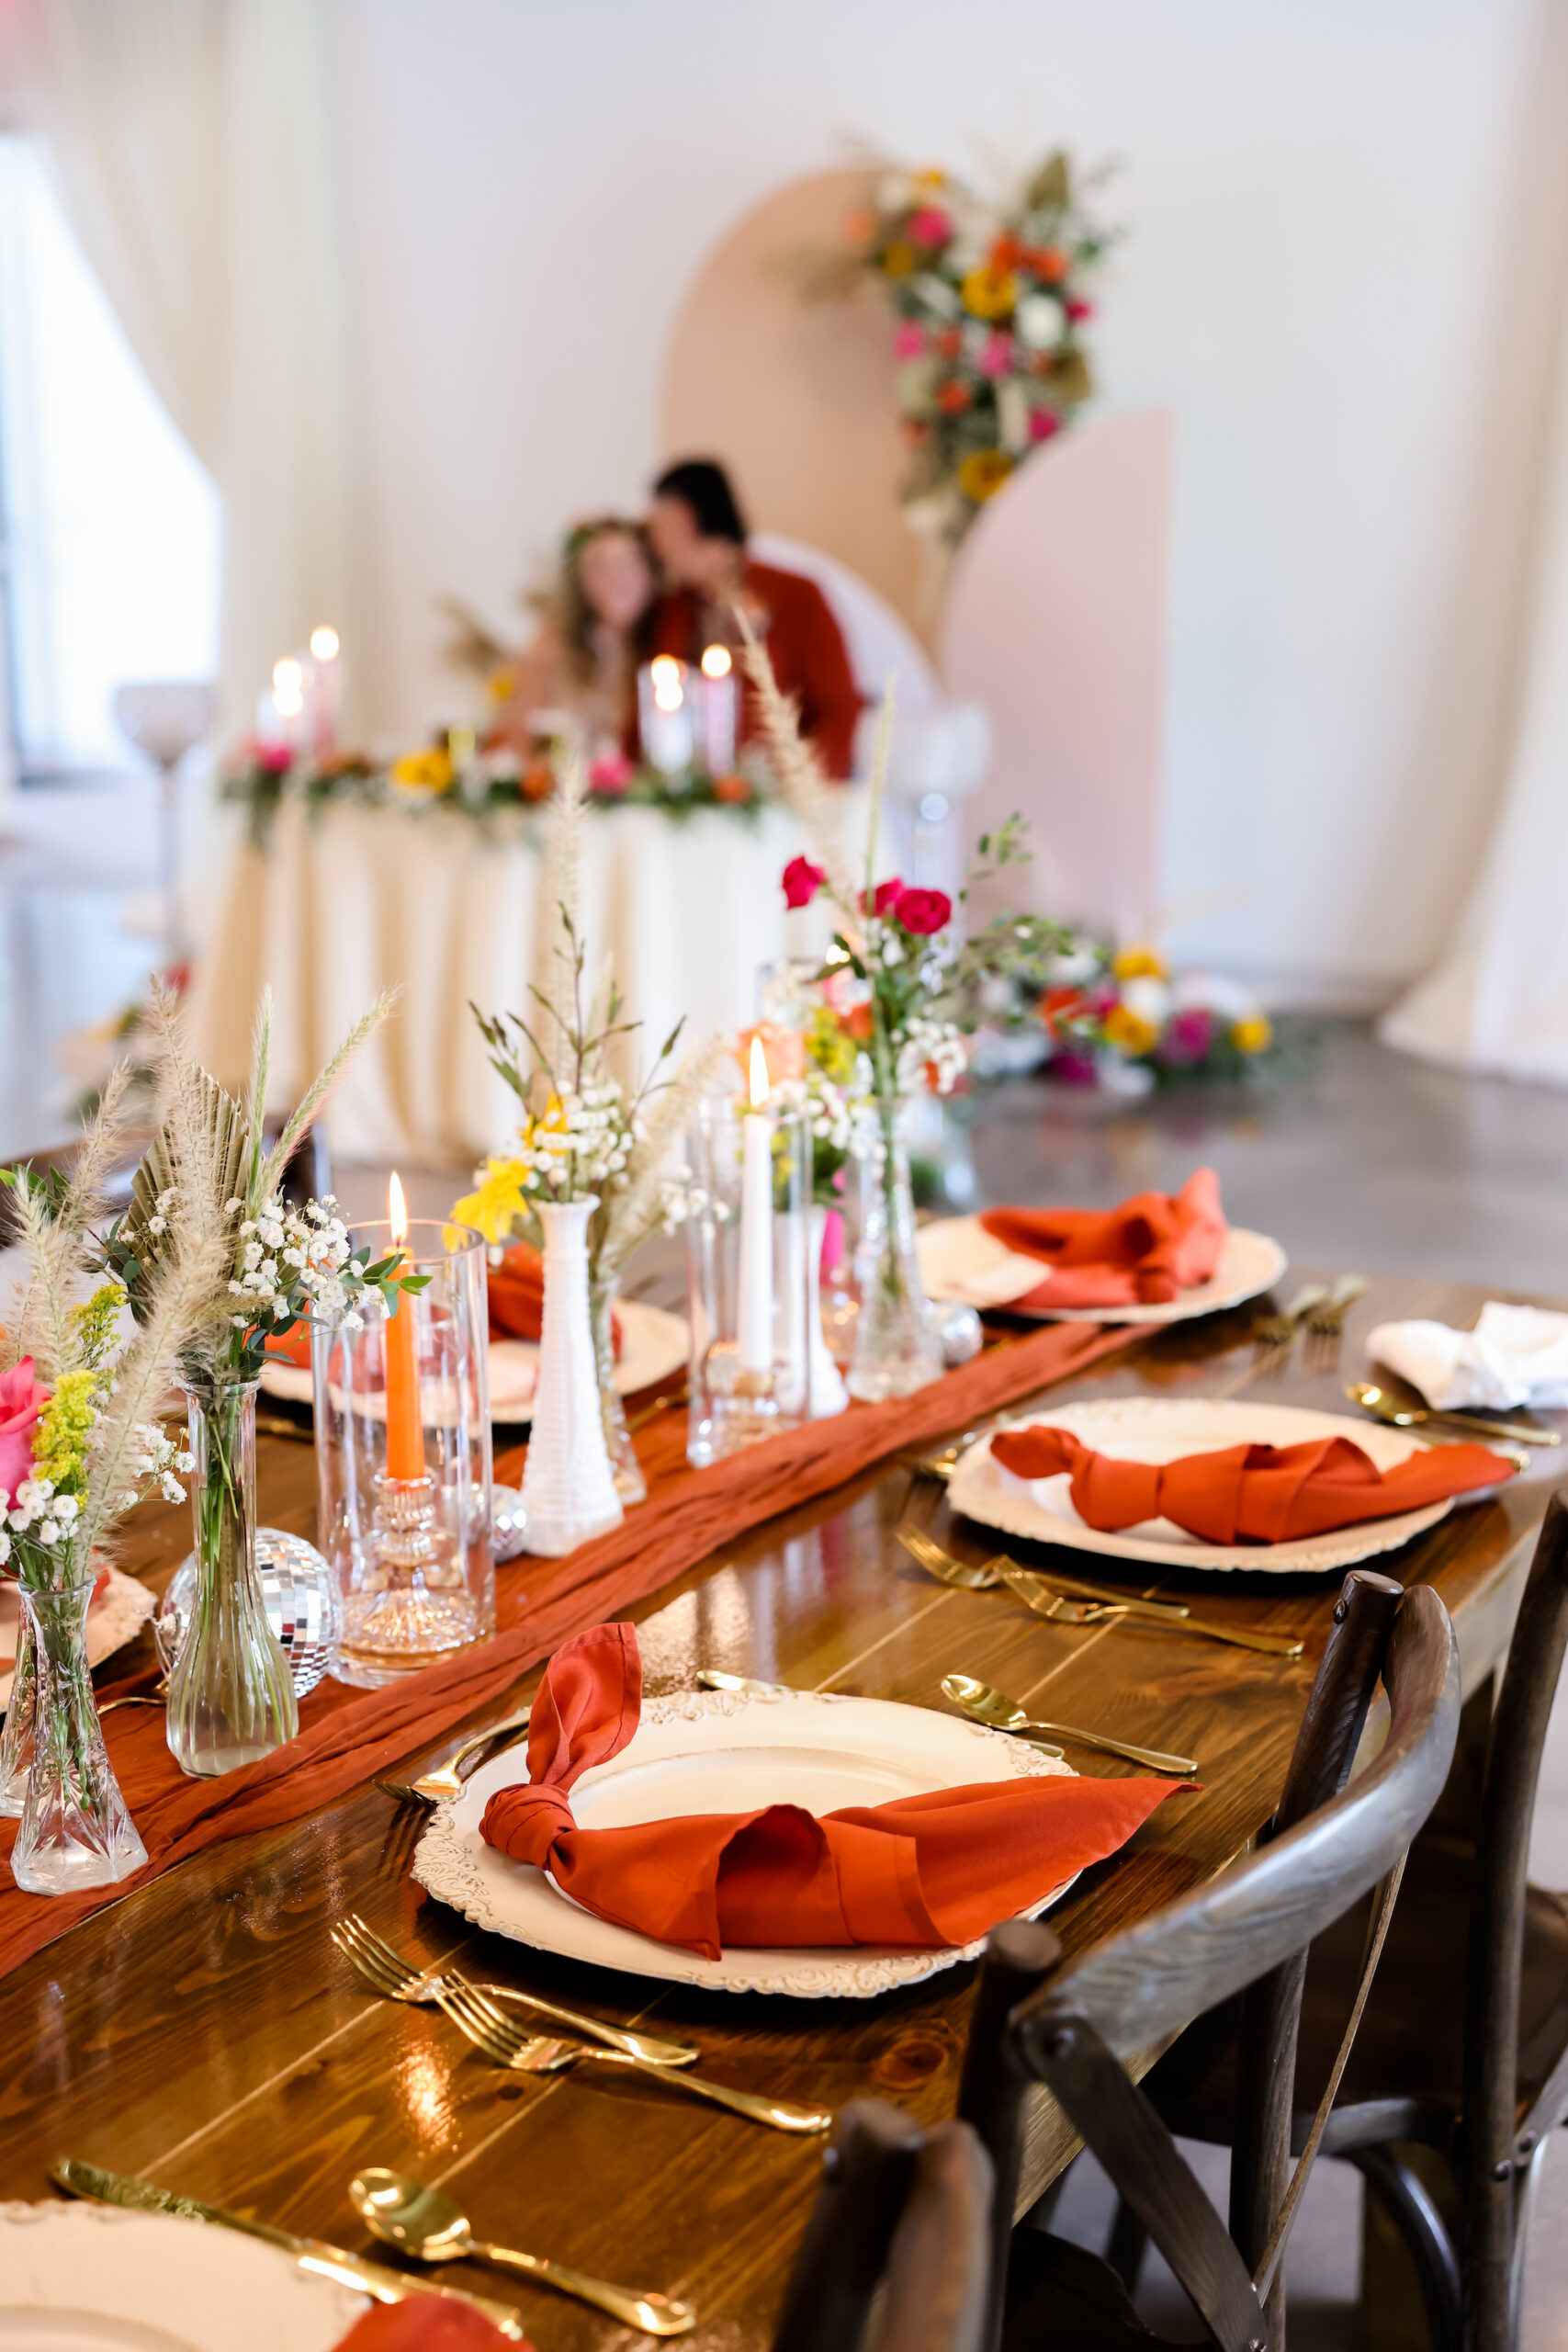 Vintage Fall Boho Wedding Reception Disco Ball and Floral Centerpiece Ideas | Orange Terracotta Table Runners and Napkins | Tampa Bay Rentals Outside the Box Rentals